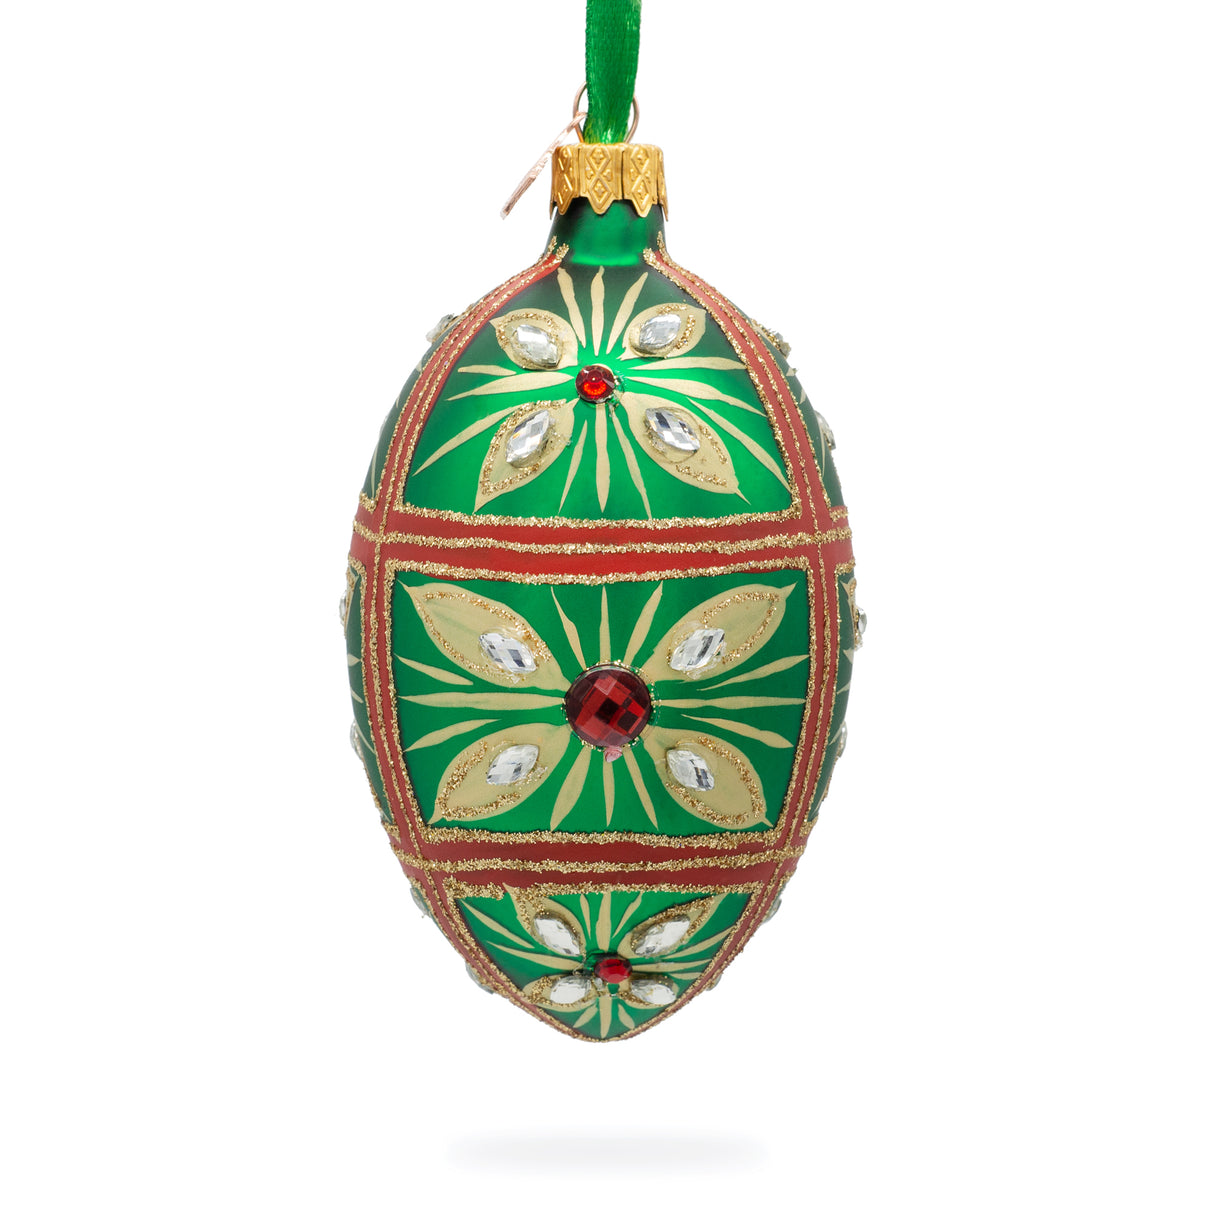 Red Jewel on Green Glass Egg Ornament 4 Inches in Multi color, Oval shape